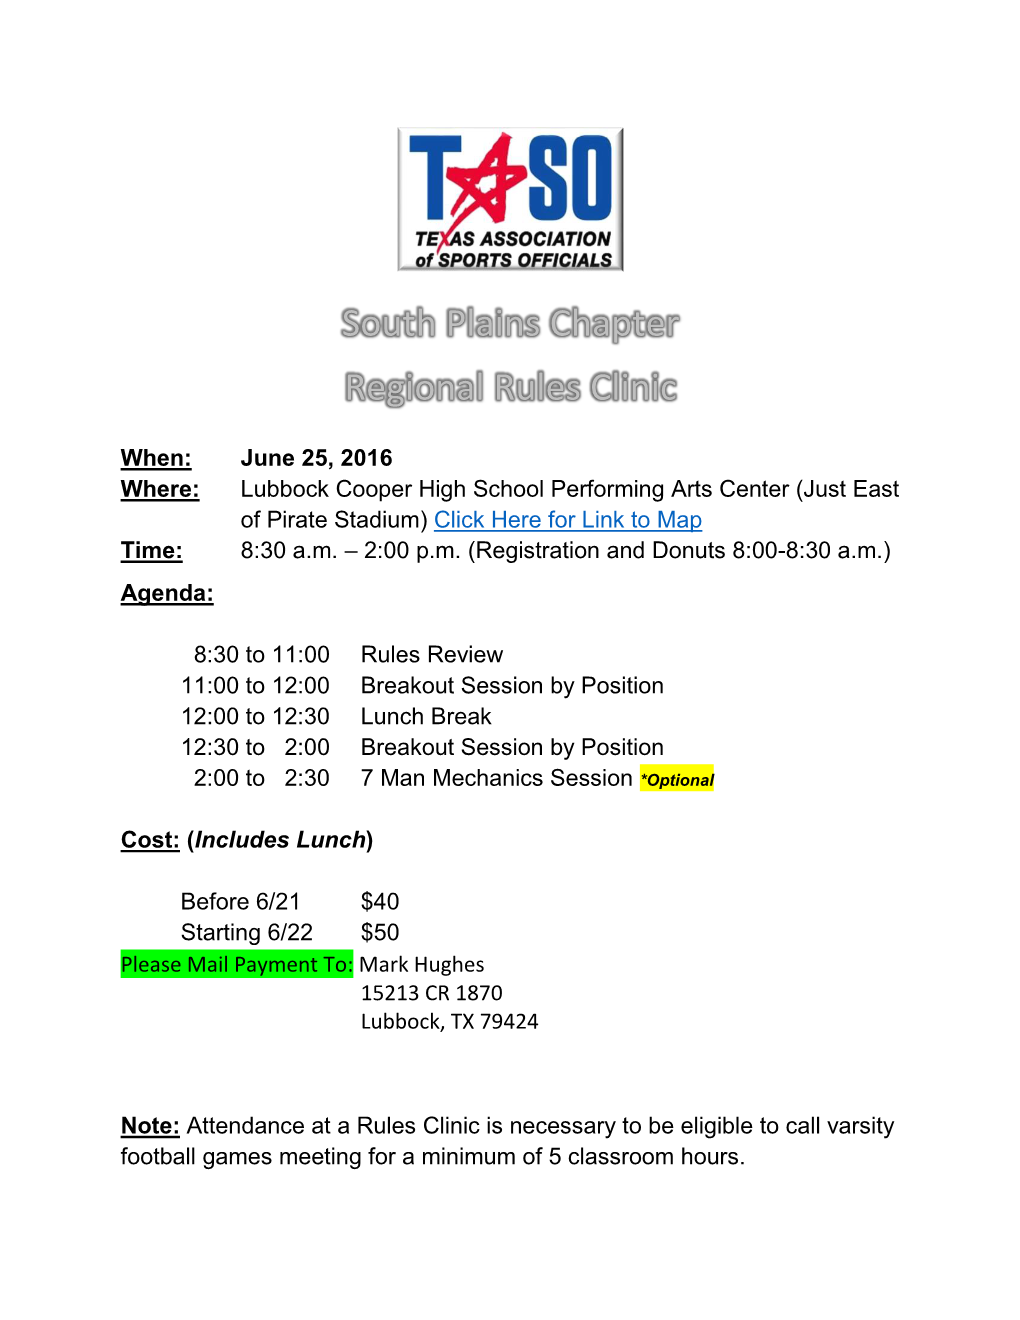 South Plains Chapter Regional Rules Clinic